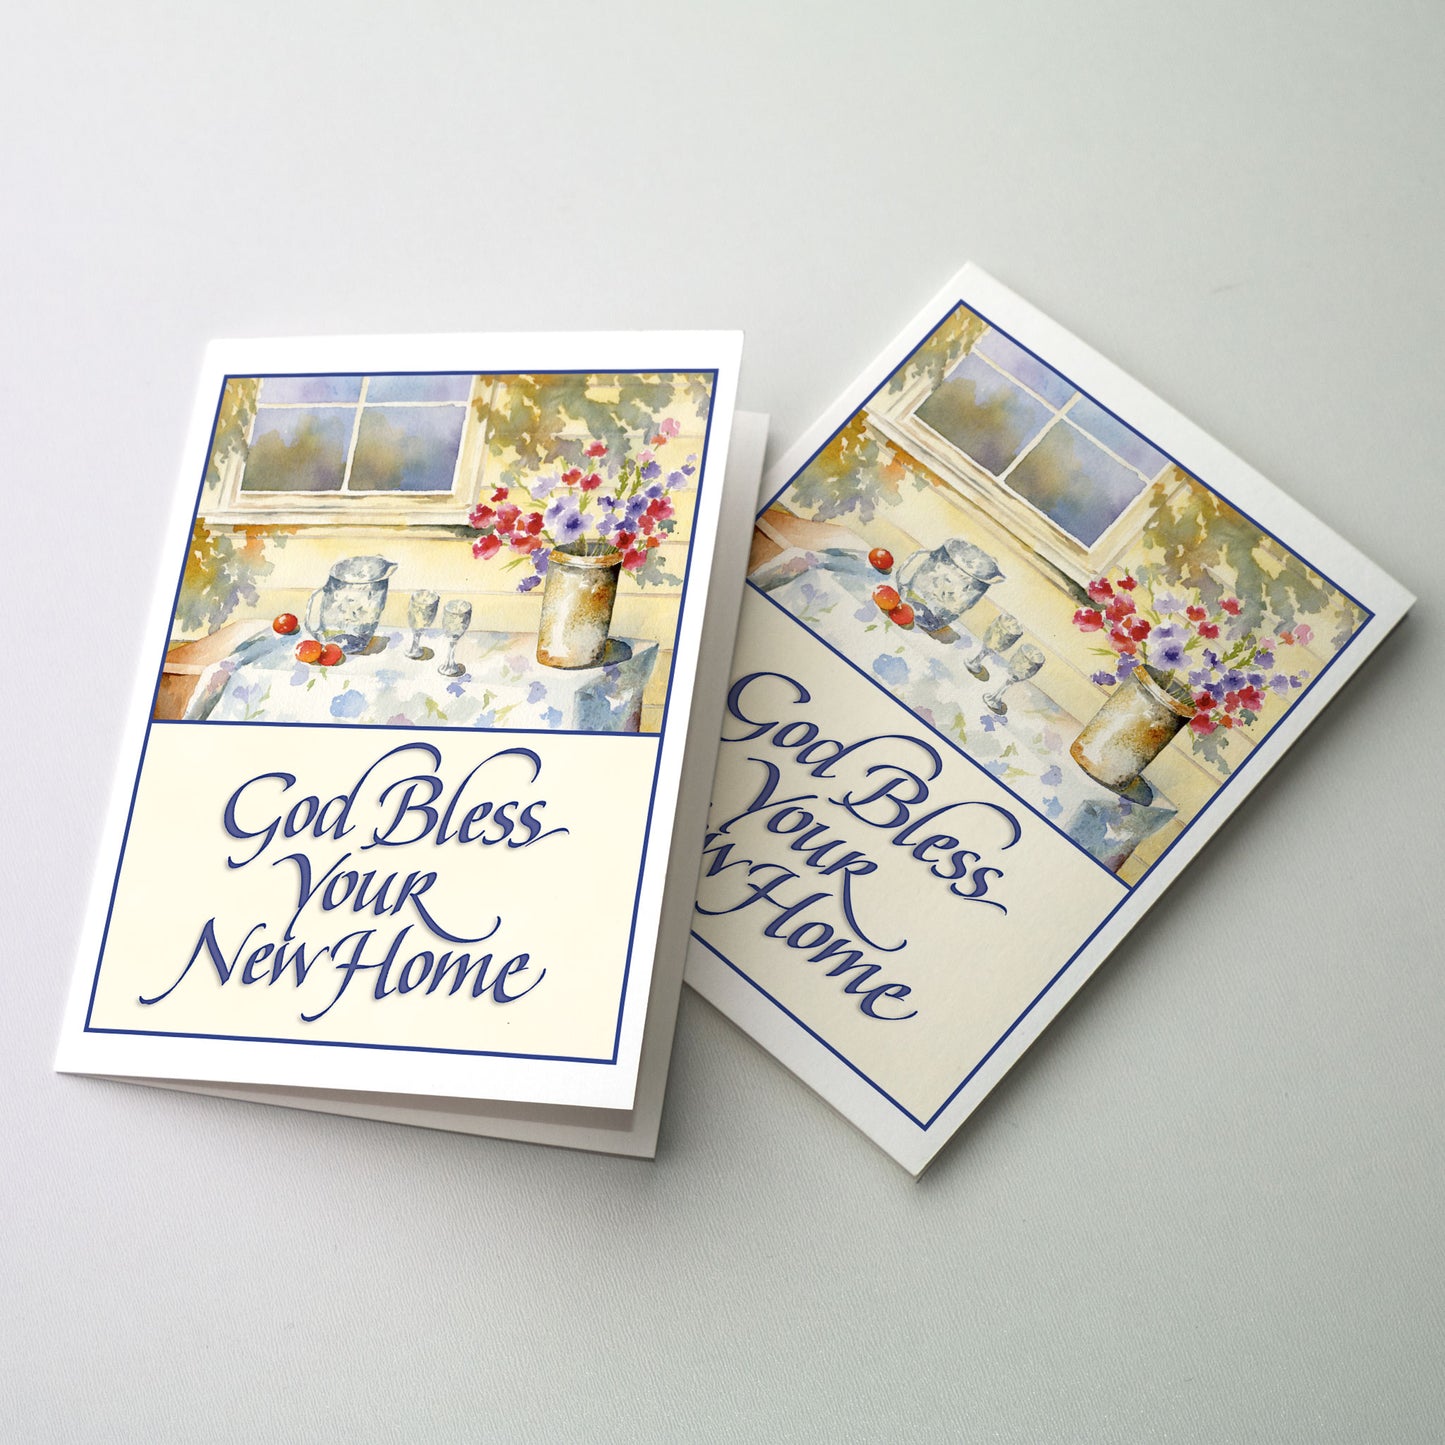 God Bless Your New Home - New Home Card